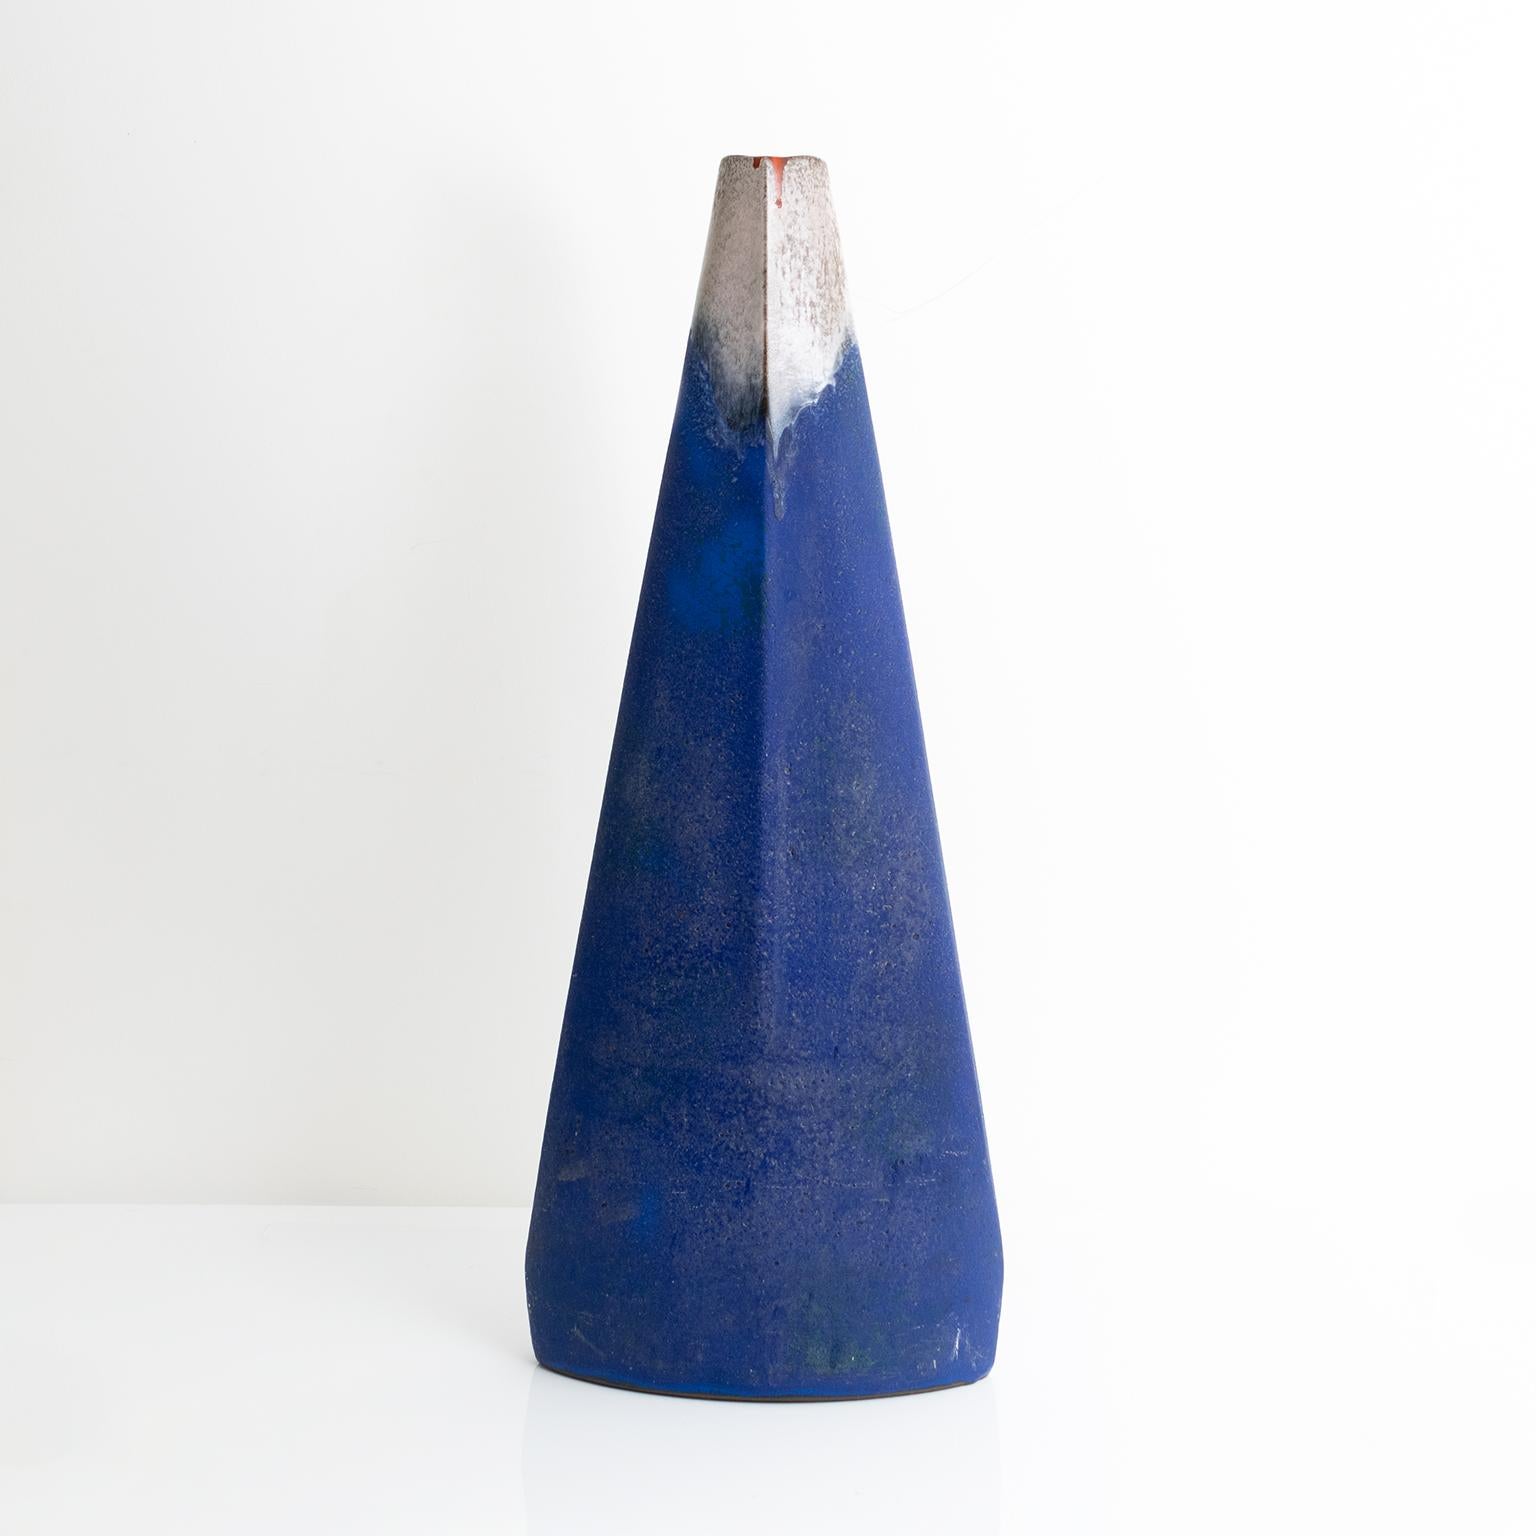 A very large Mid-Century Modern Azzirro vase in deeply saturated cobalt blue glaze with red and earthy colors around the opening. Mad by Ceramano-Kunstkeramik, Ransbach-Baumbach, West-Germany, circa 1960. 

Measures: Height 34”, width 14”, depth